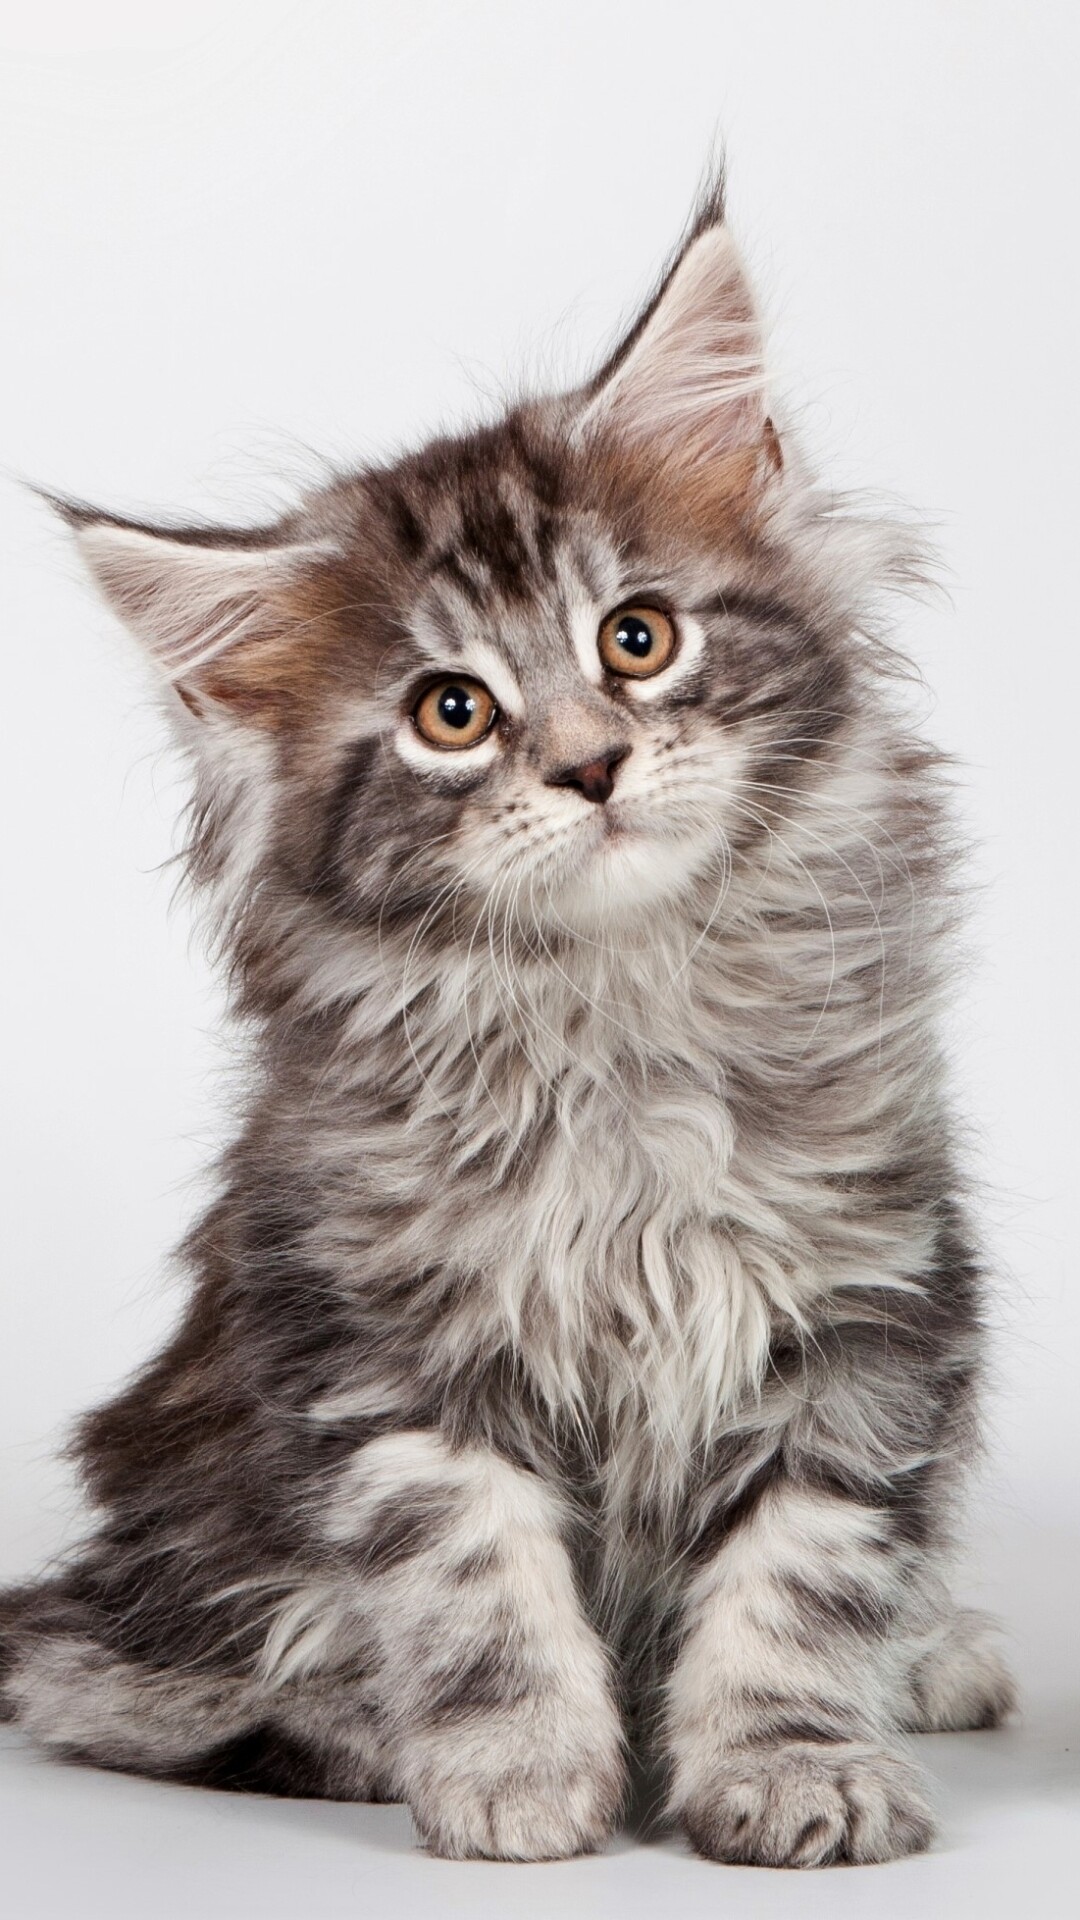 Maine Coon: Known for its massive size, shaggy coat, and large tufted ears reminiscent of a bobcat. 1080x1920 Full HD Background.